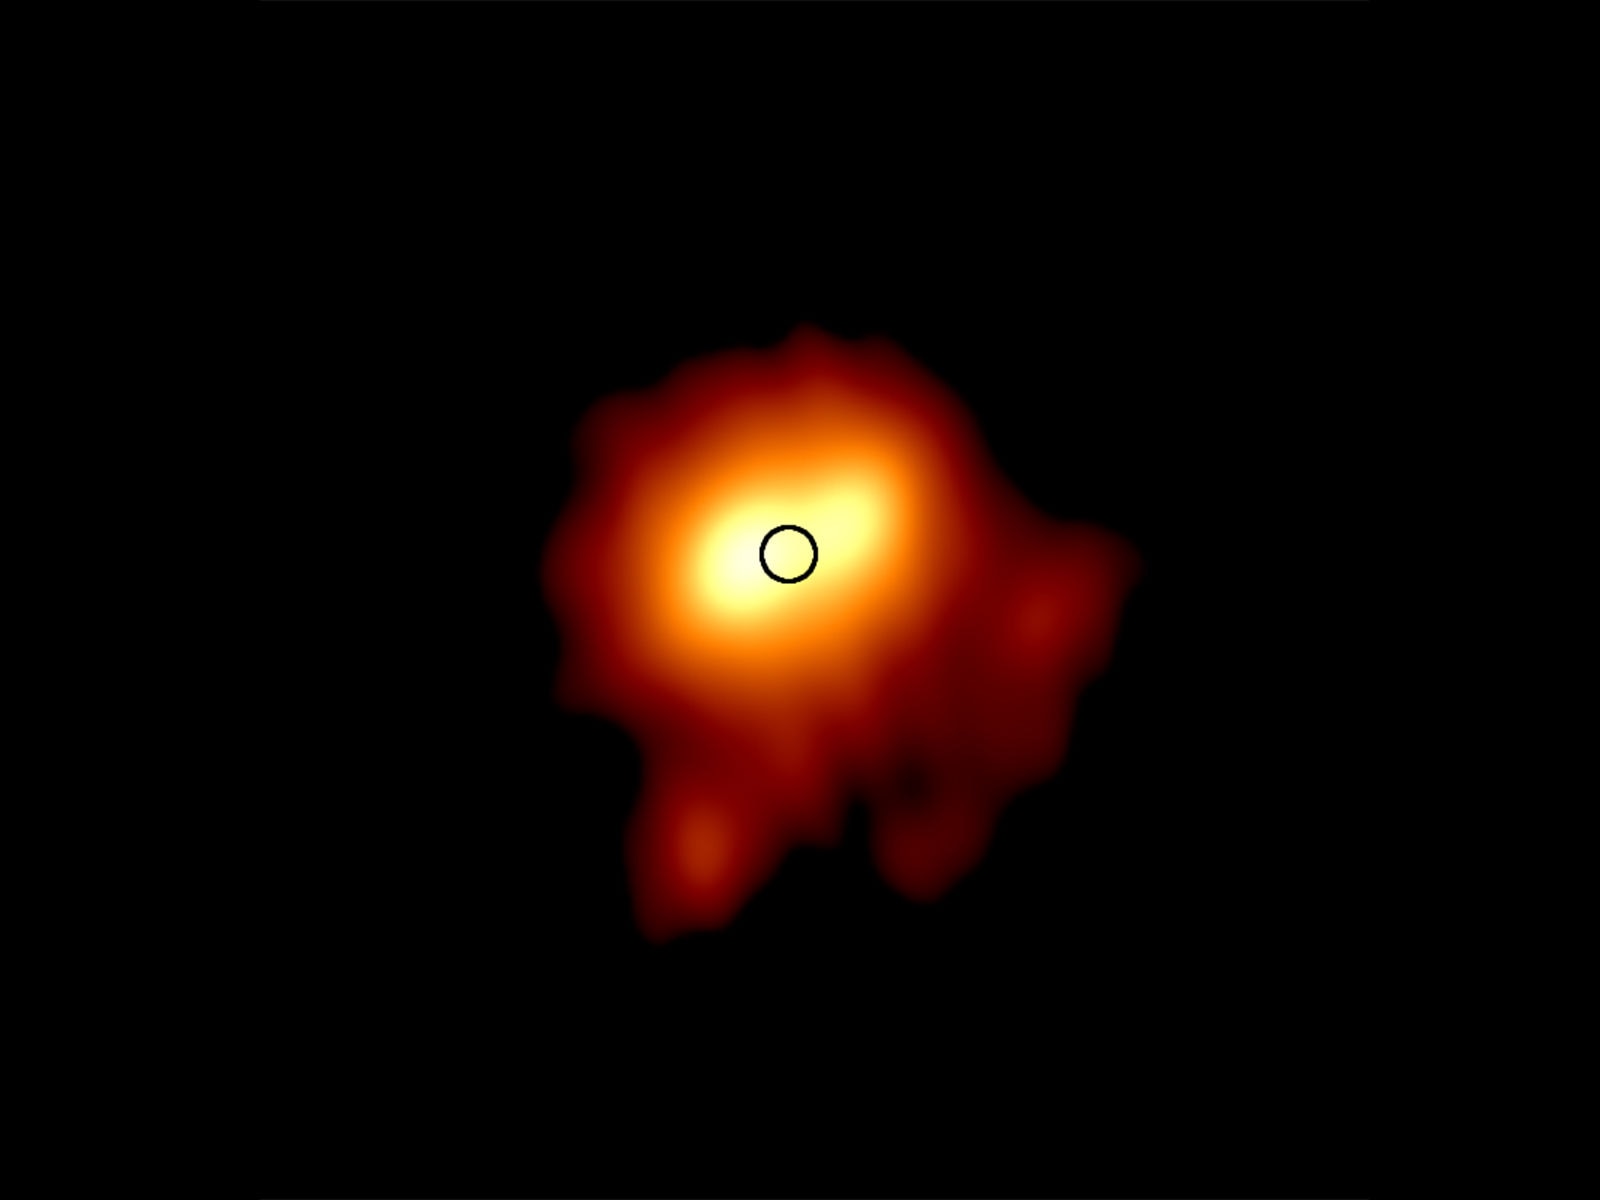 An image of the star Betelgeuse by the e-MERLIN radio telescope shows it has blown out a huge plume of gas, nearly as large as our entire solar system. The black circle denotes the size of the star. Credit: University of Manchester